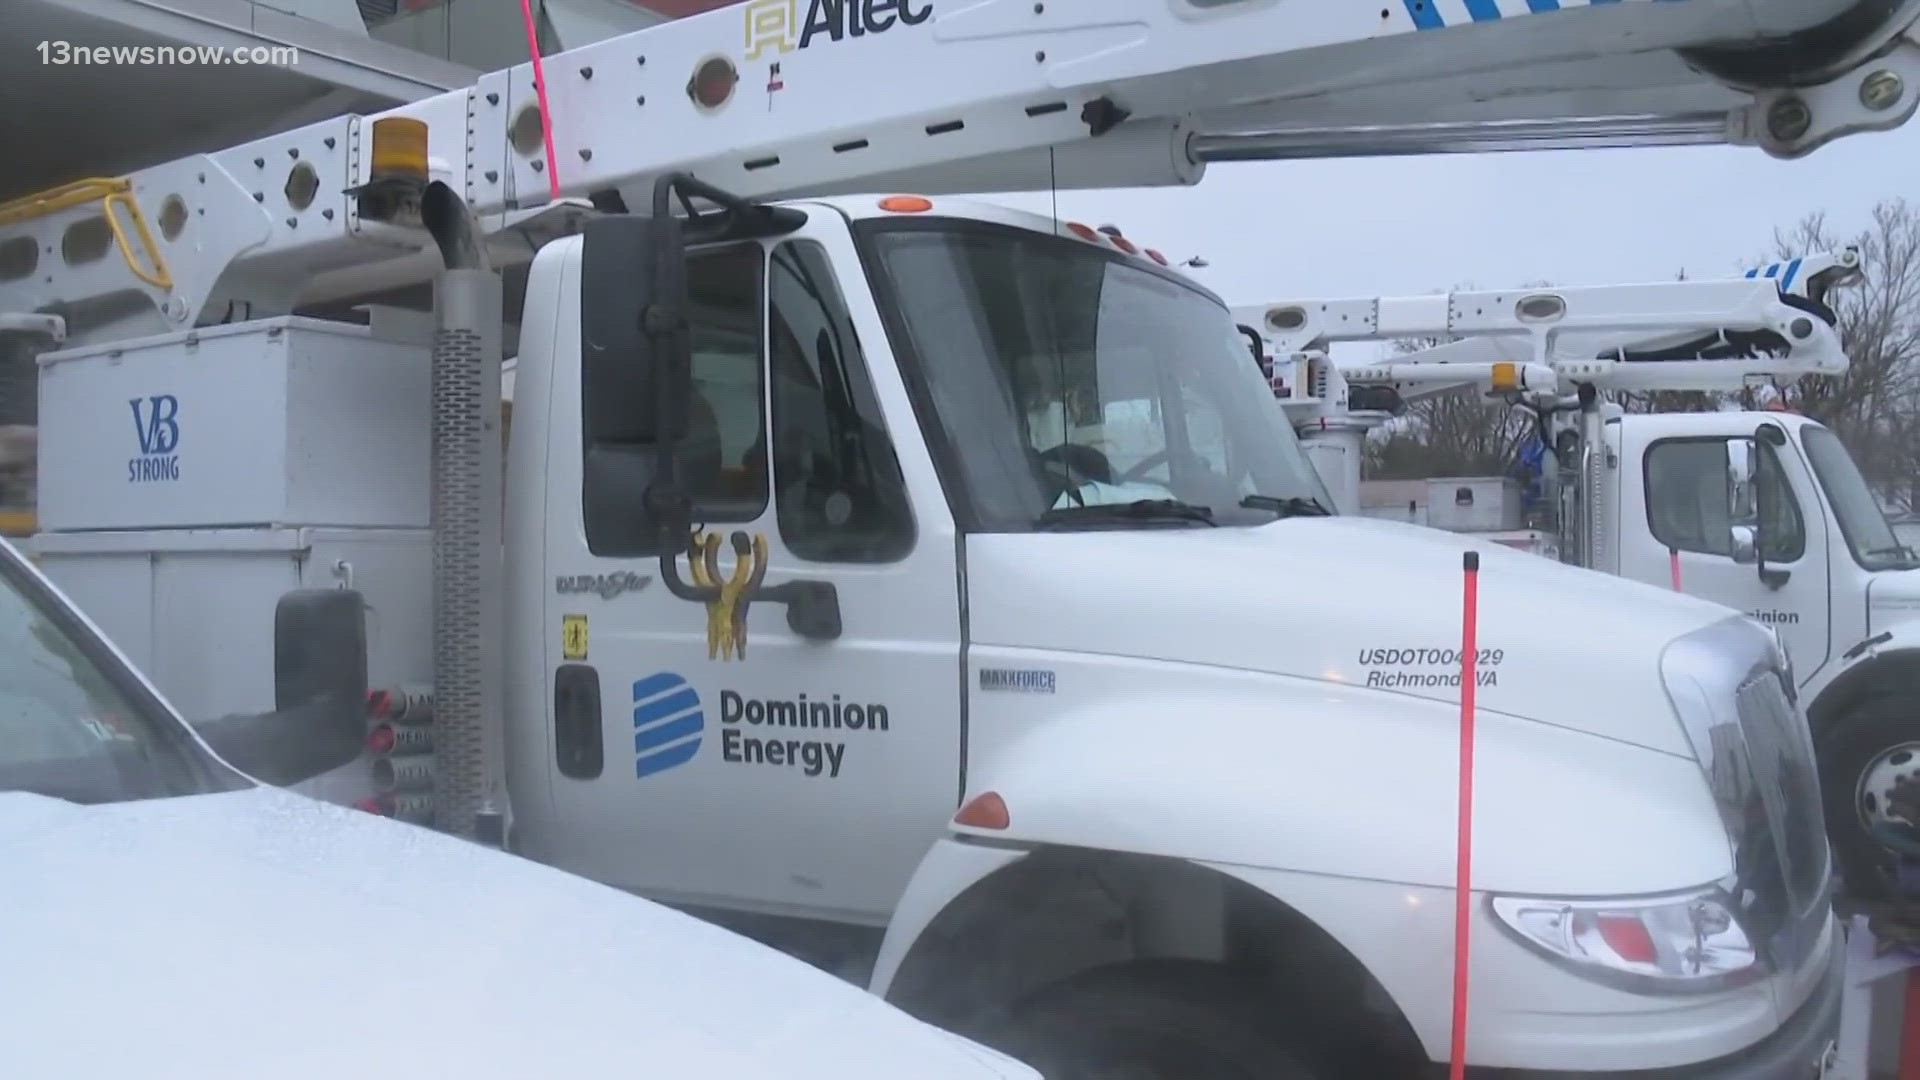 Dominion Energy is preparing for power outages across our region, with some trucks already headed out of the Norfolk office.